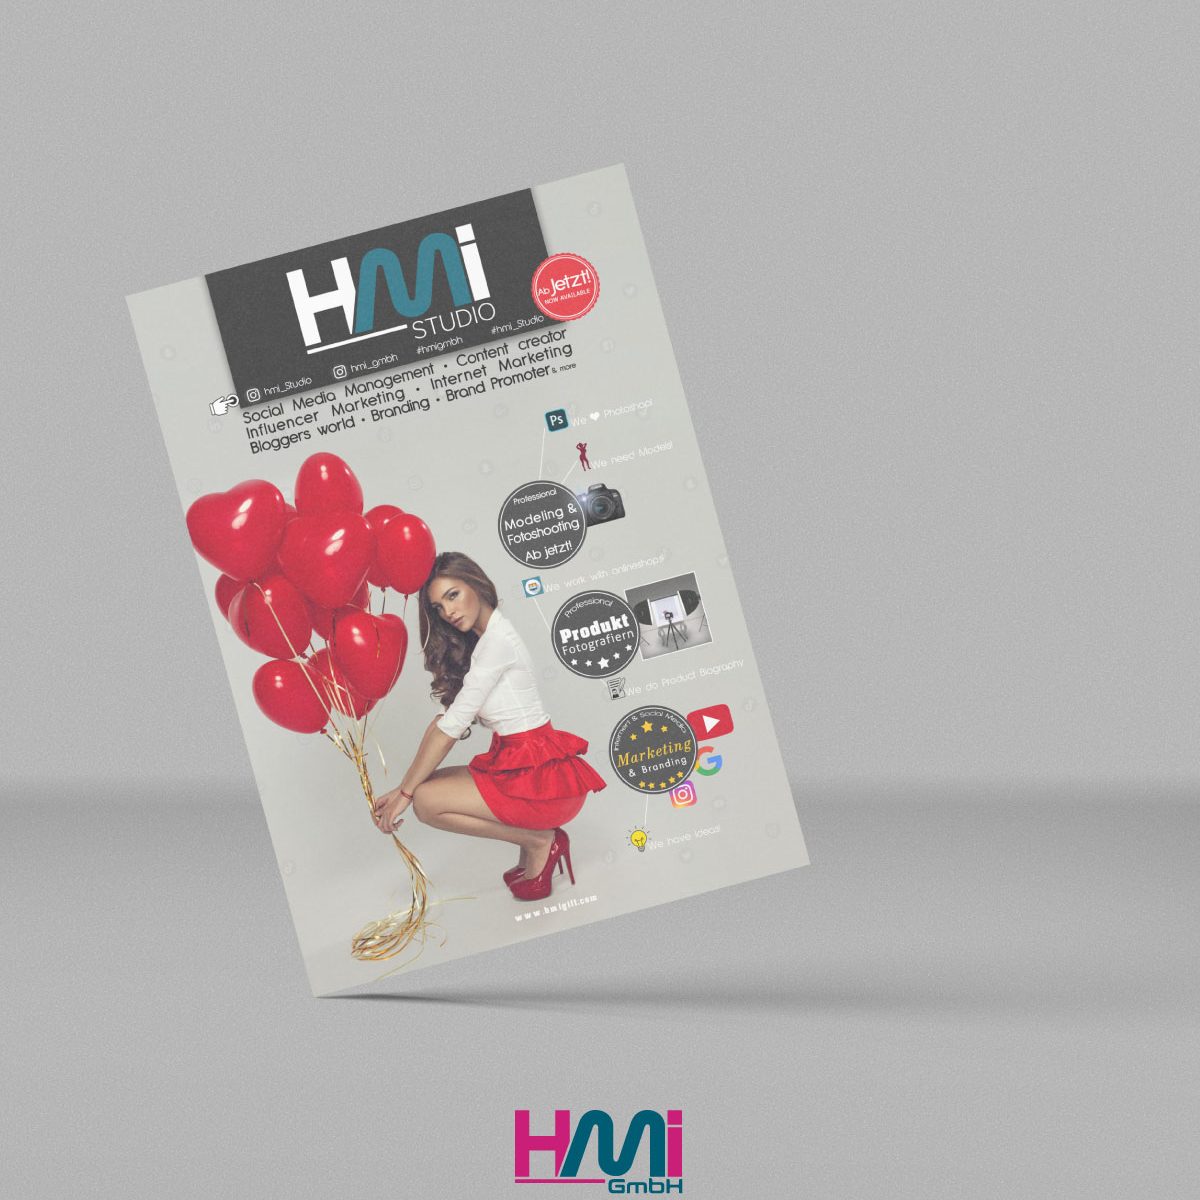 Print your Leaflets at HMi printing shop in Düsseldorf | HMI Printing company offers best prices and deals for Flyer printing in Germany | hmi-ad.com offers best prices for Leaflets printing